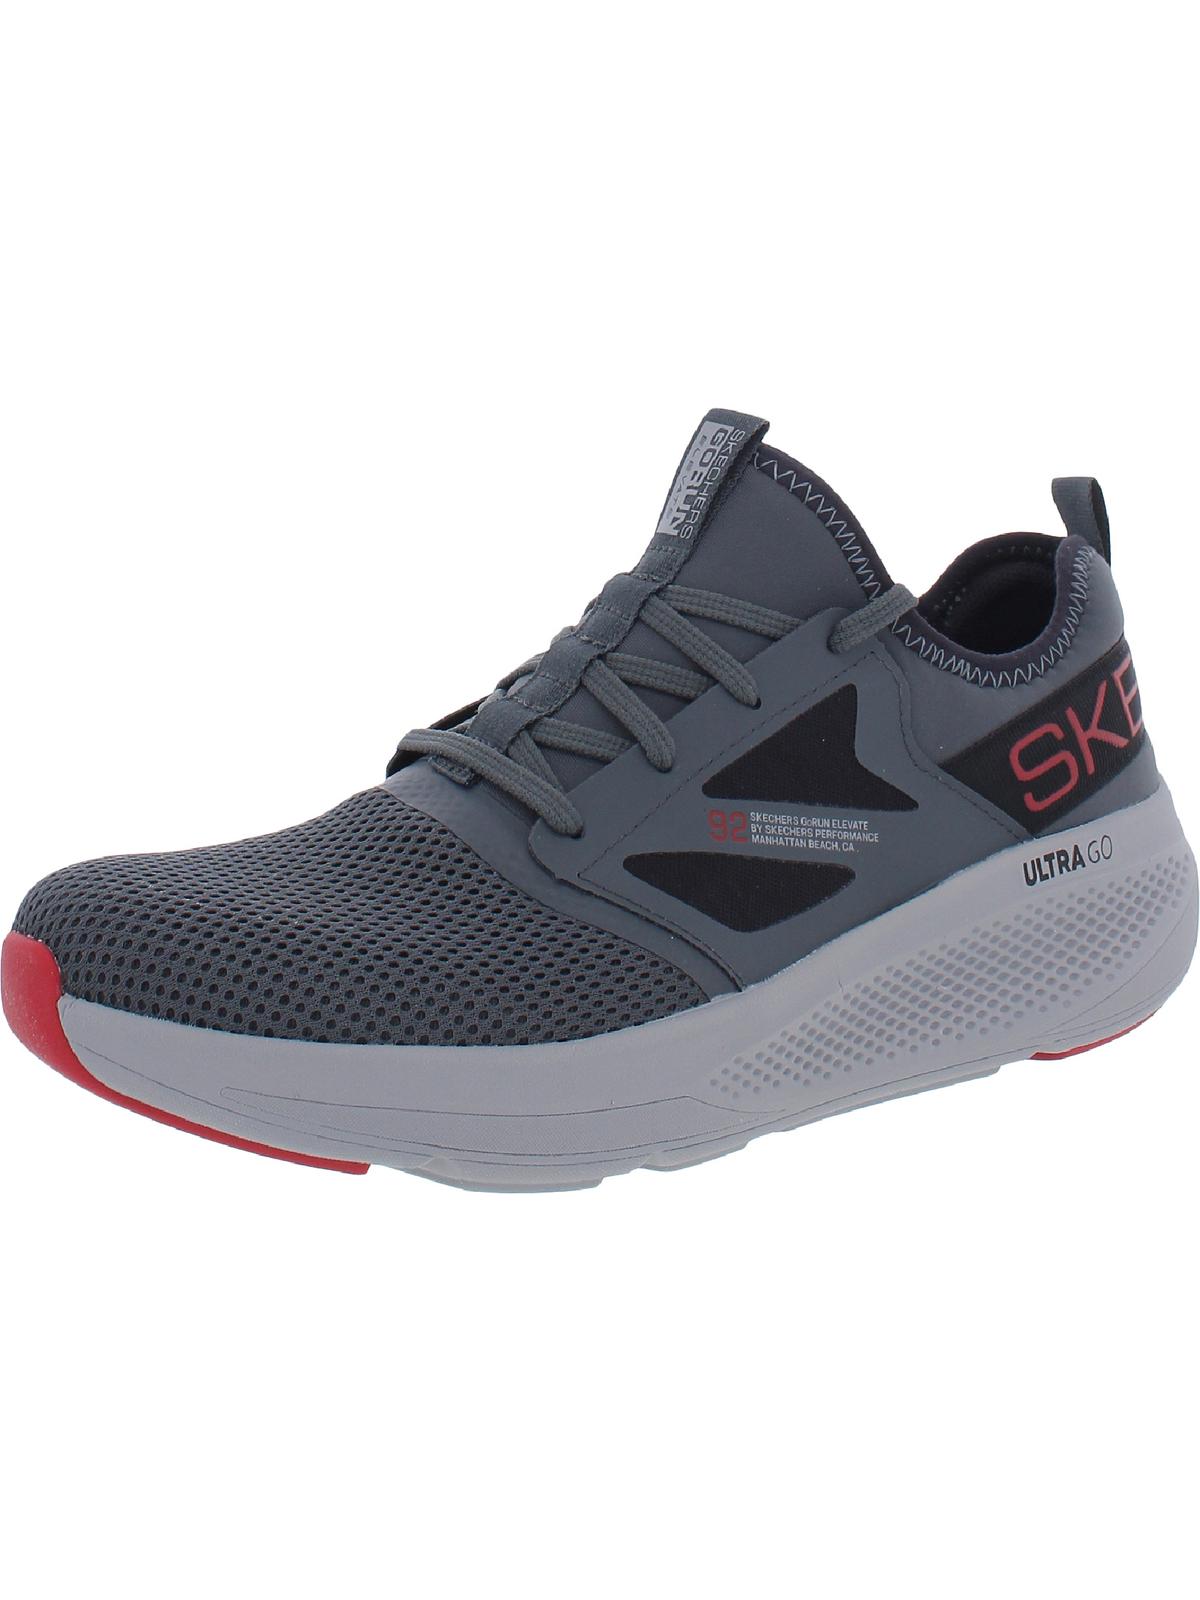 SKECHERS Go Run Elevate- Ultimate Valor Mens Fitness Lifestyle Athletic and Training Shoes